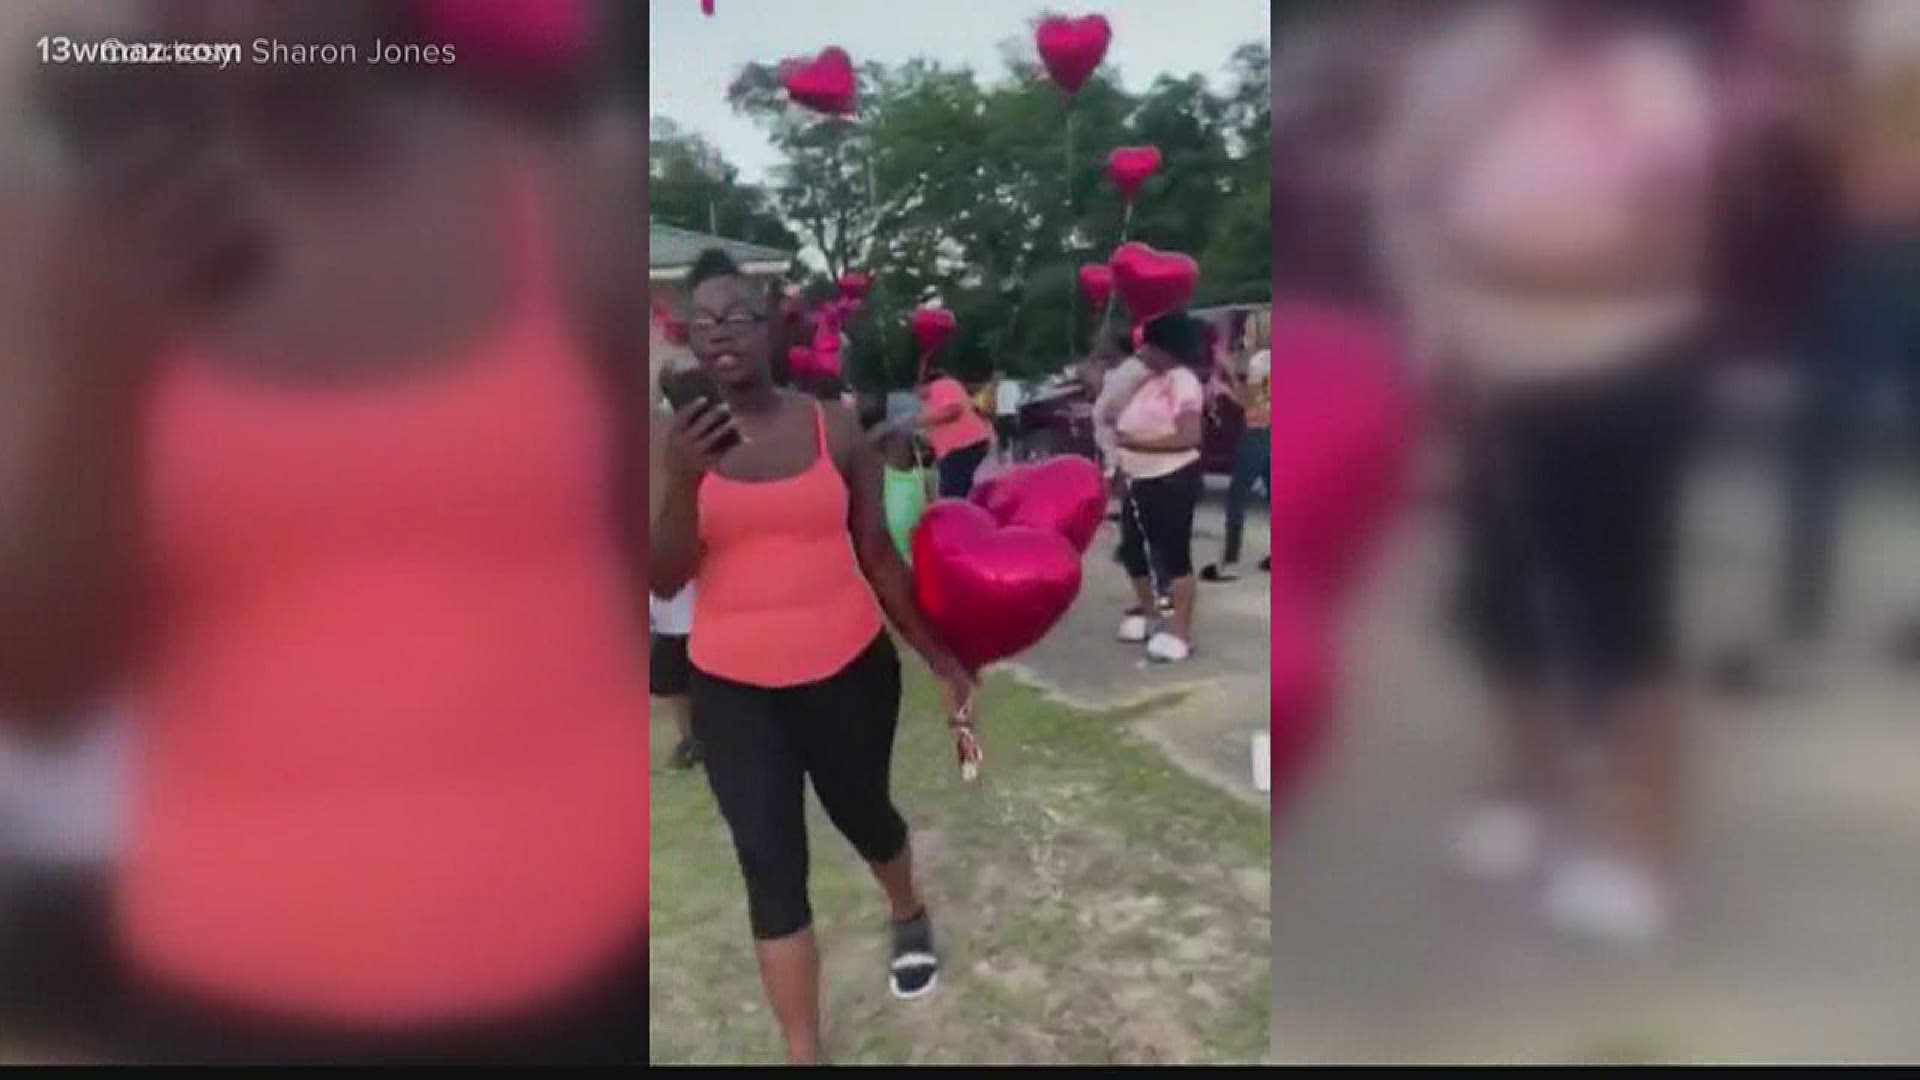 The family of Quinton Gipson held a small ceremony in his honor. Gipson was shot and killed in Dublin over what officers believe was a fight about rent payments.